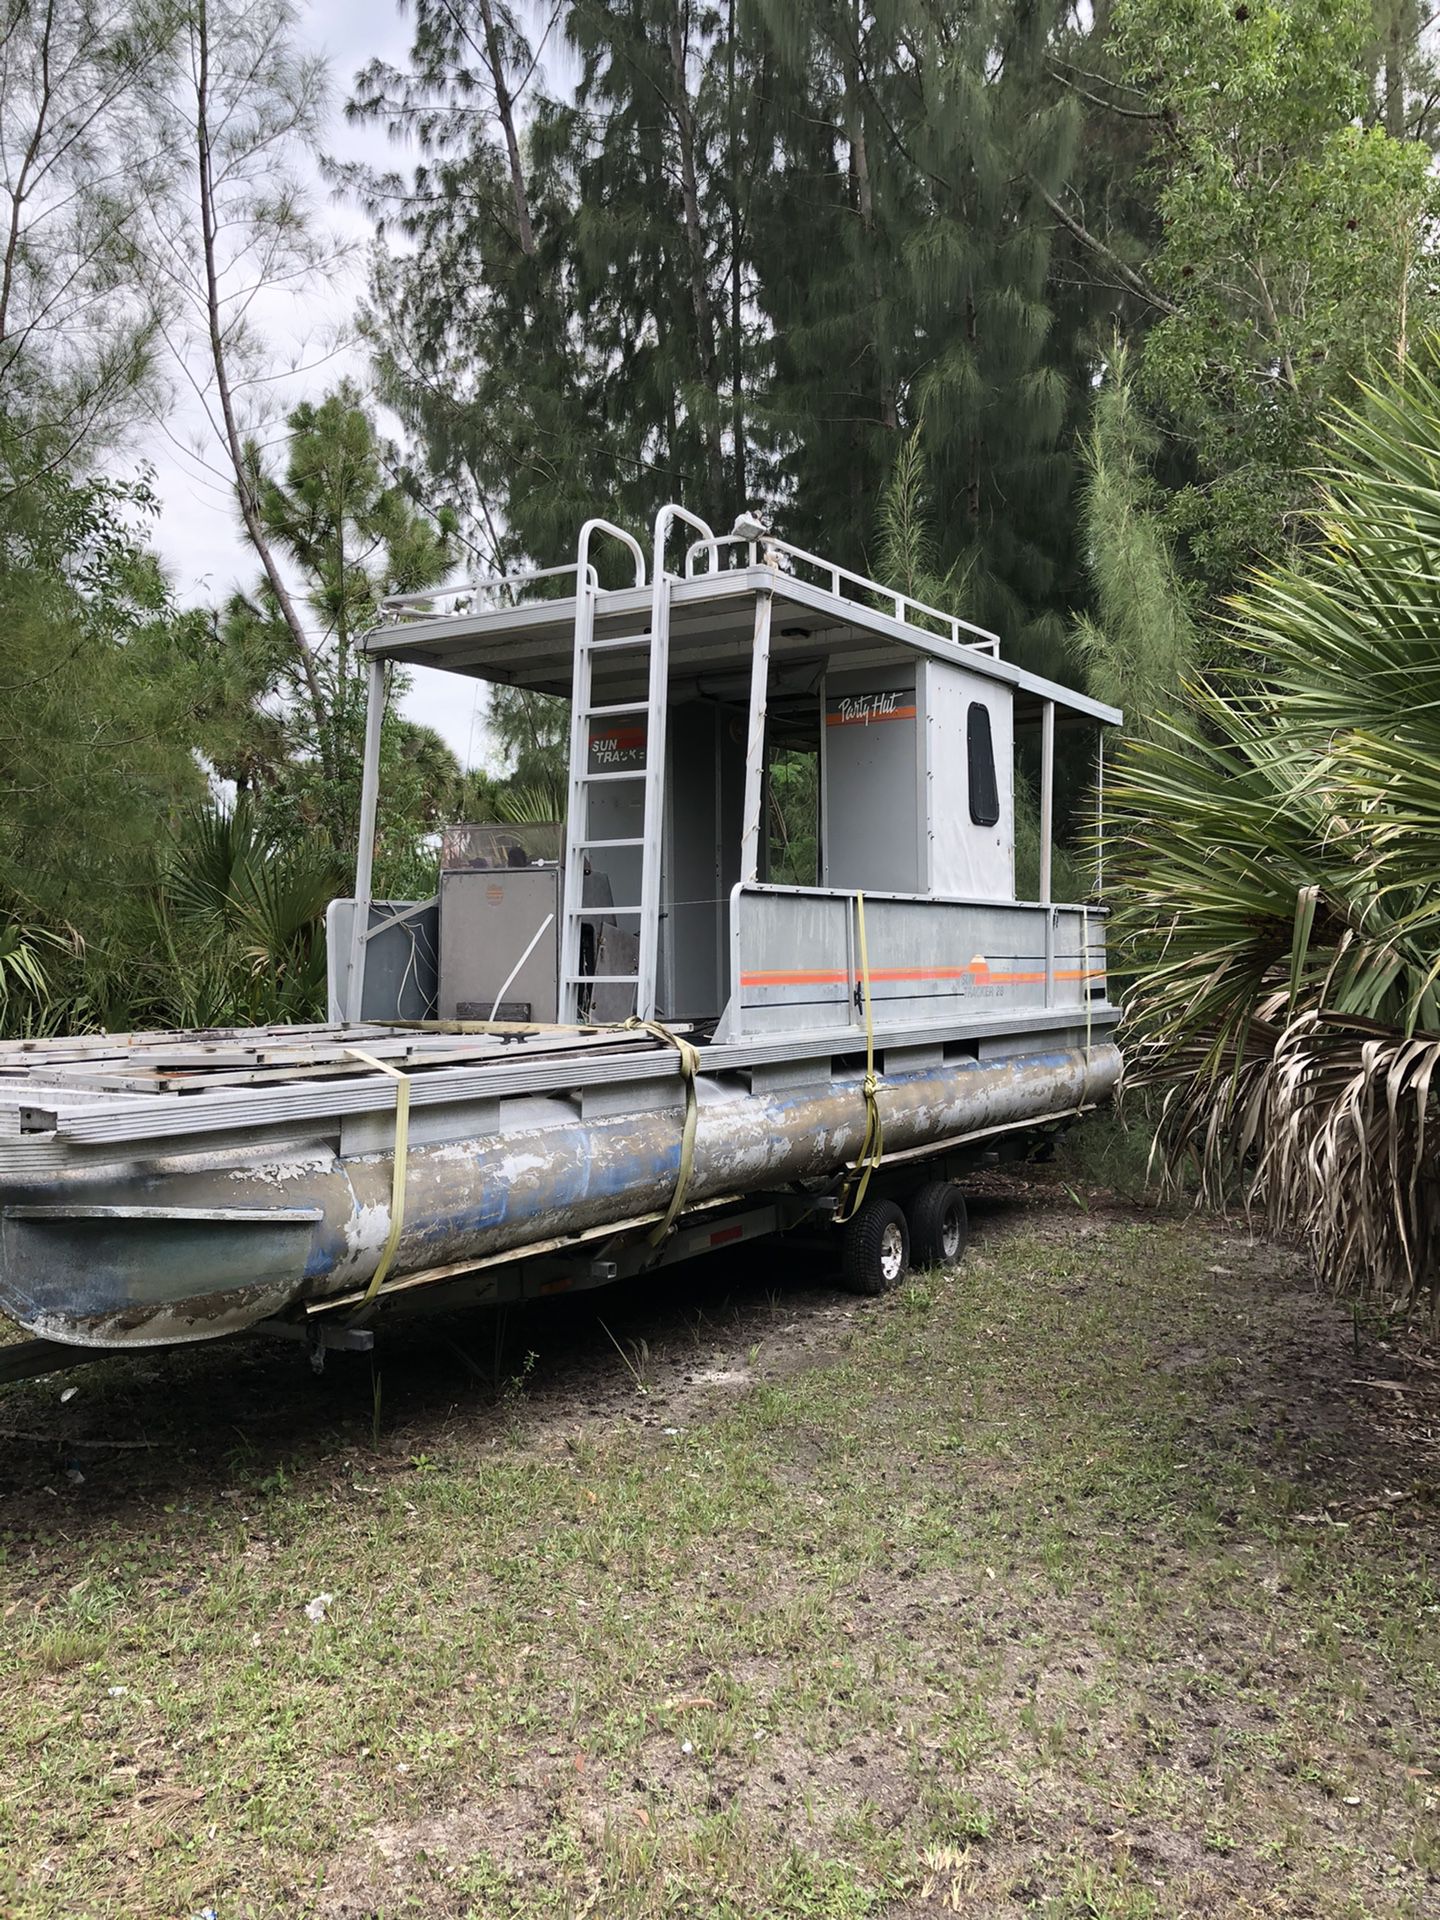 28 foot pontoon boat and trailer